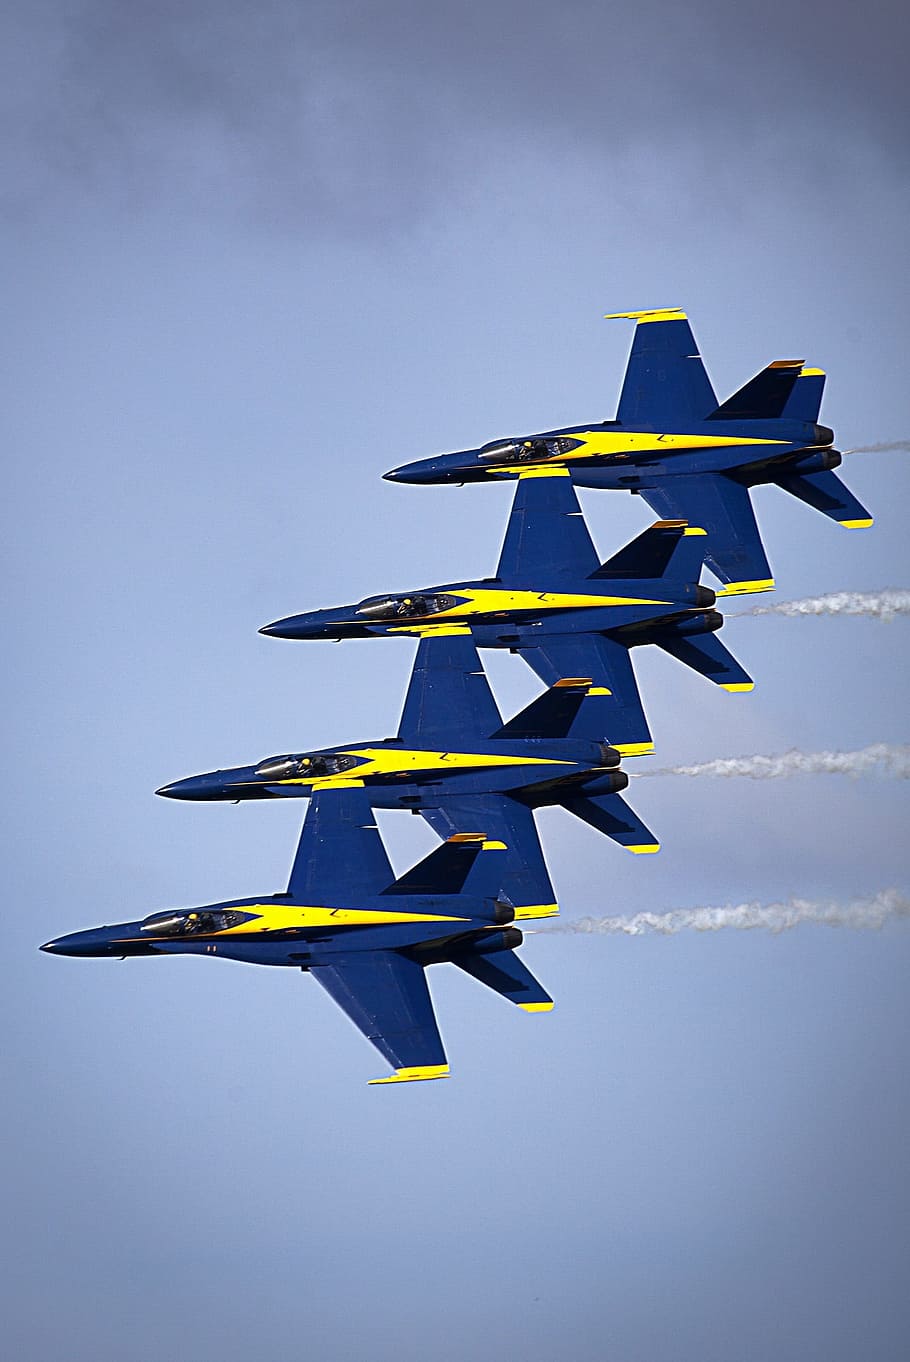 four, blue-and-yellow jet planes, flight, blue angels, navy, precision, planes, training, sortie, maneuvers